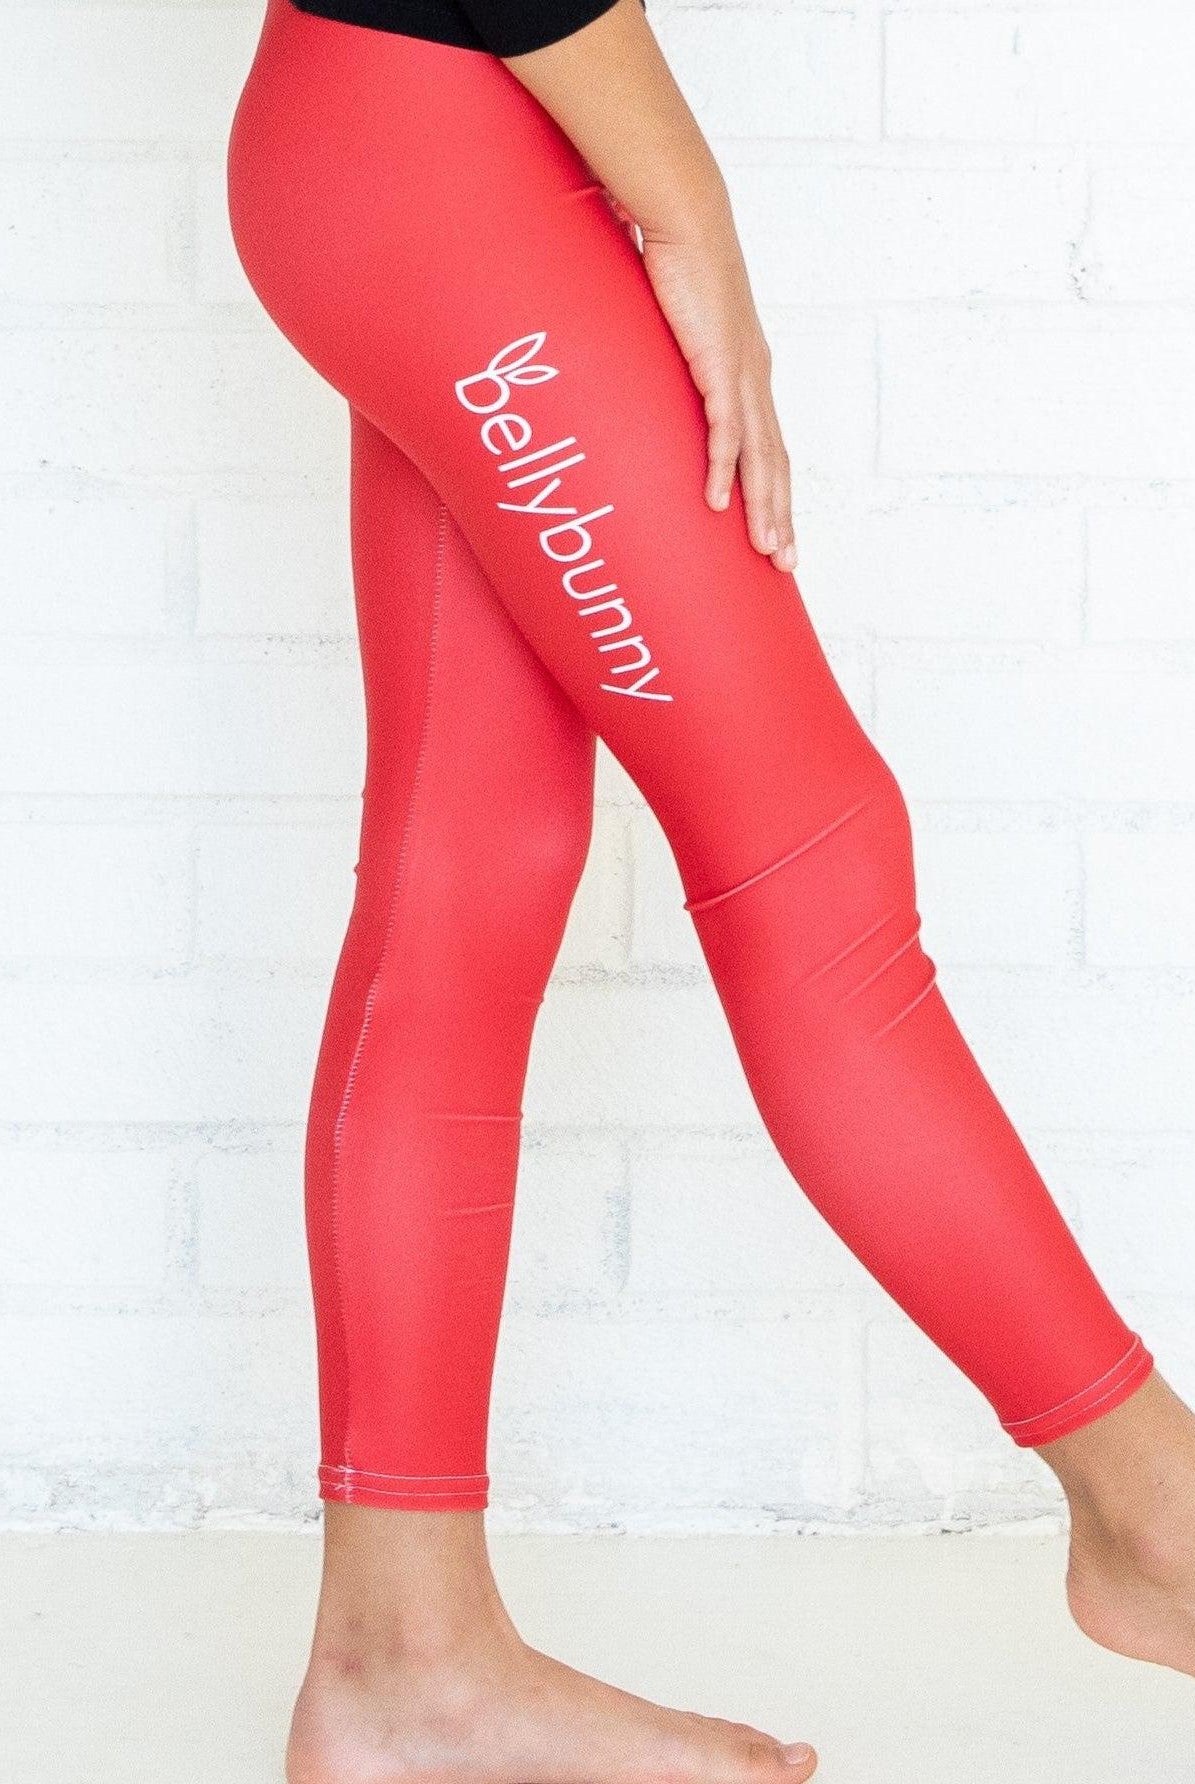 Bellybunny-Youth Leggings-red with white logo-side